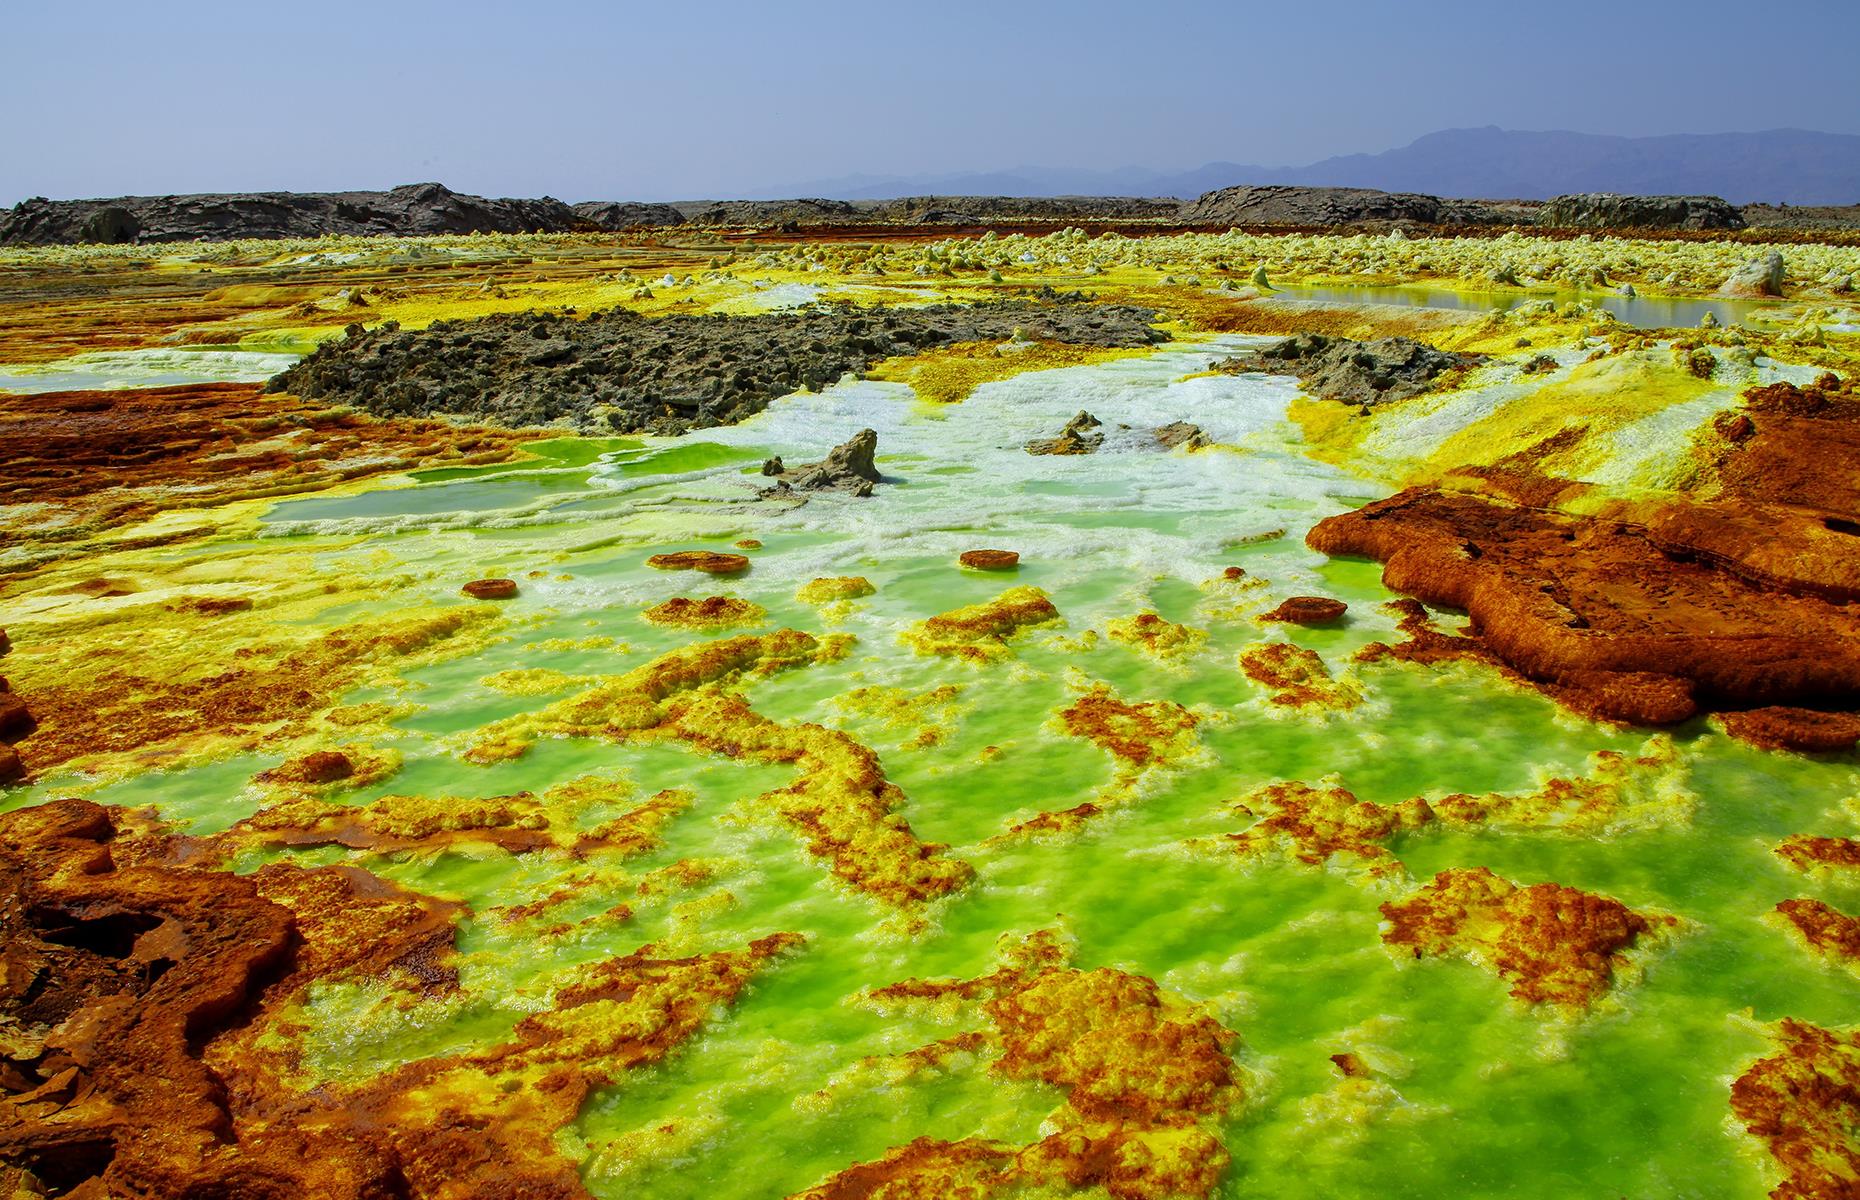 Slide 26 of 43: A result of the divergence of three tectonic plates, Ethiopia's Danakil Depression is a sight like no other. Here, steam spits out from openings in the Earth’s crust and chemicals released by the hot springs color the rocky mineral deposits yellow, orange and green. This eerie lunar-like landscape of sulfur springs is also one of the hottest places on Earth.